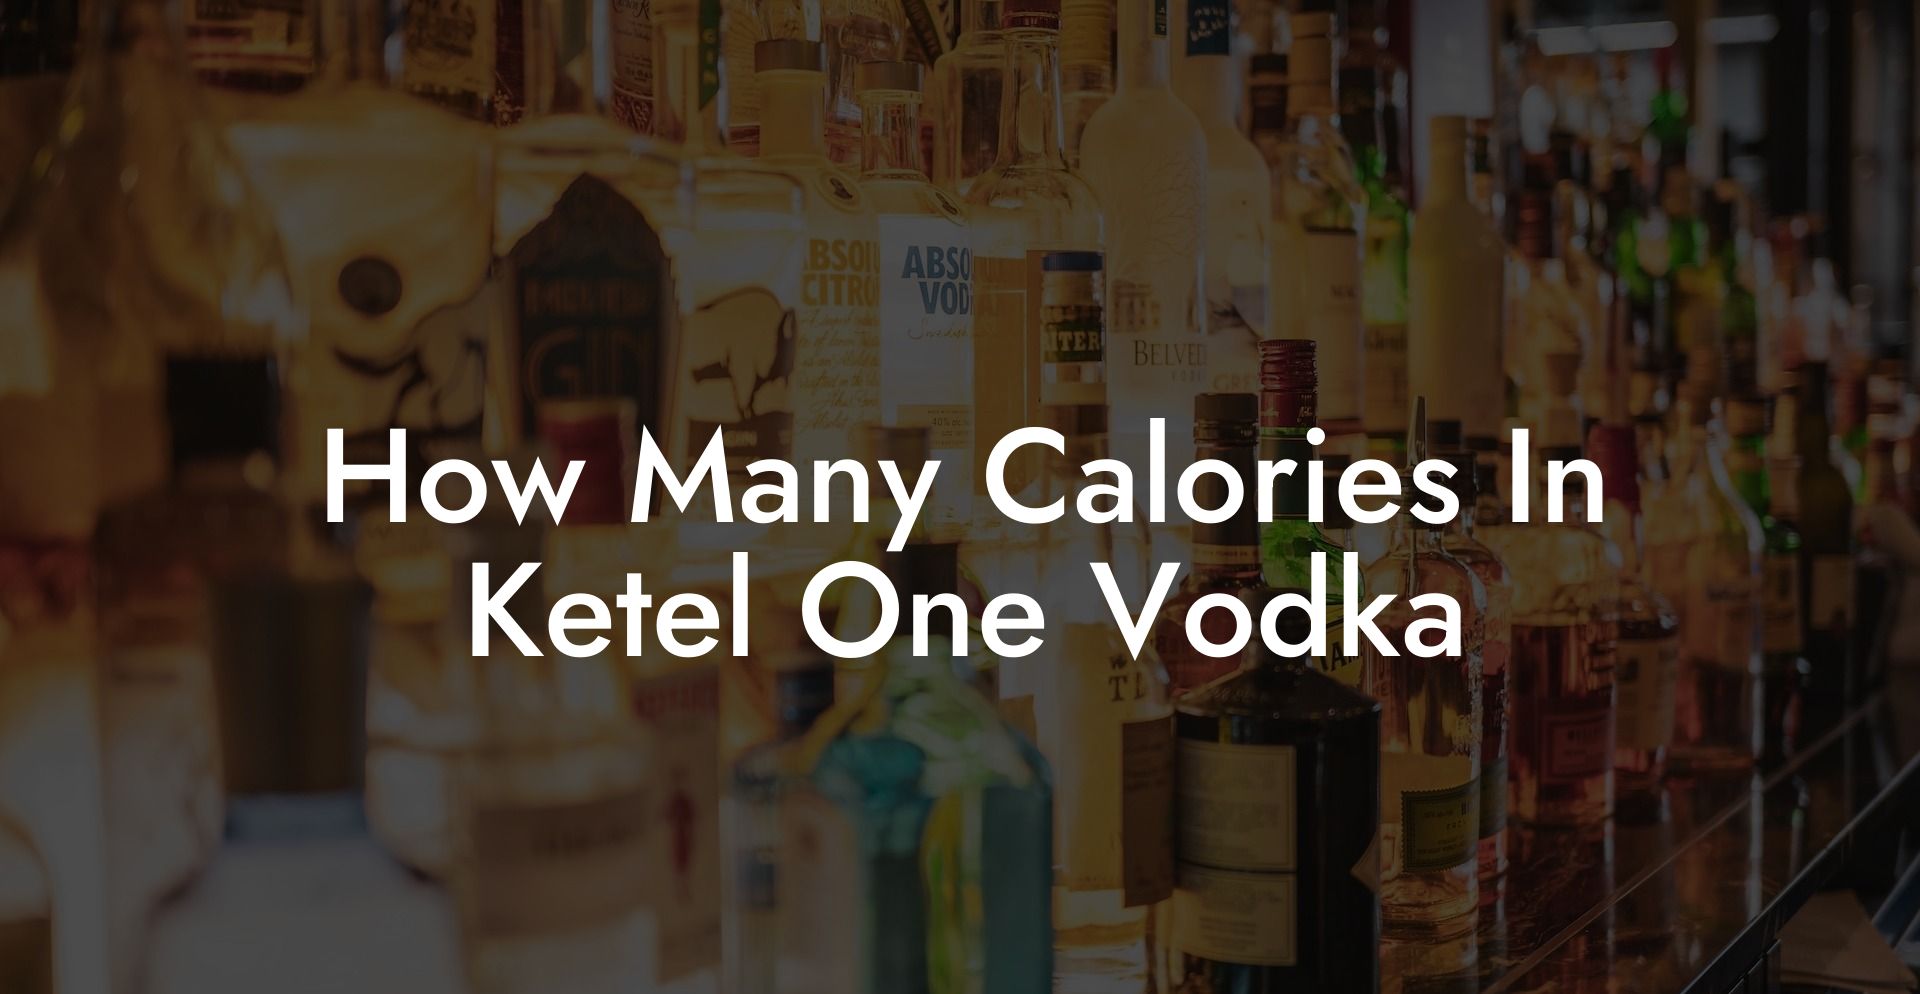 How Many Calories In Ketel One Vodka